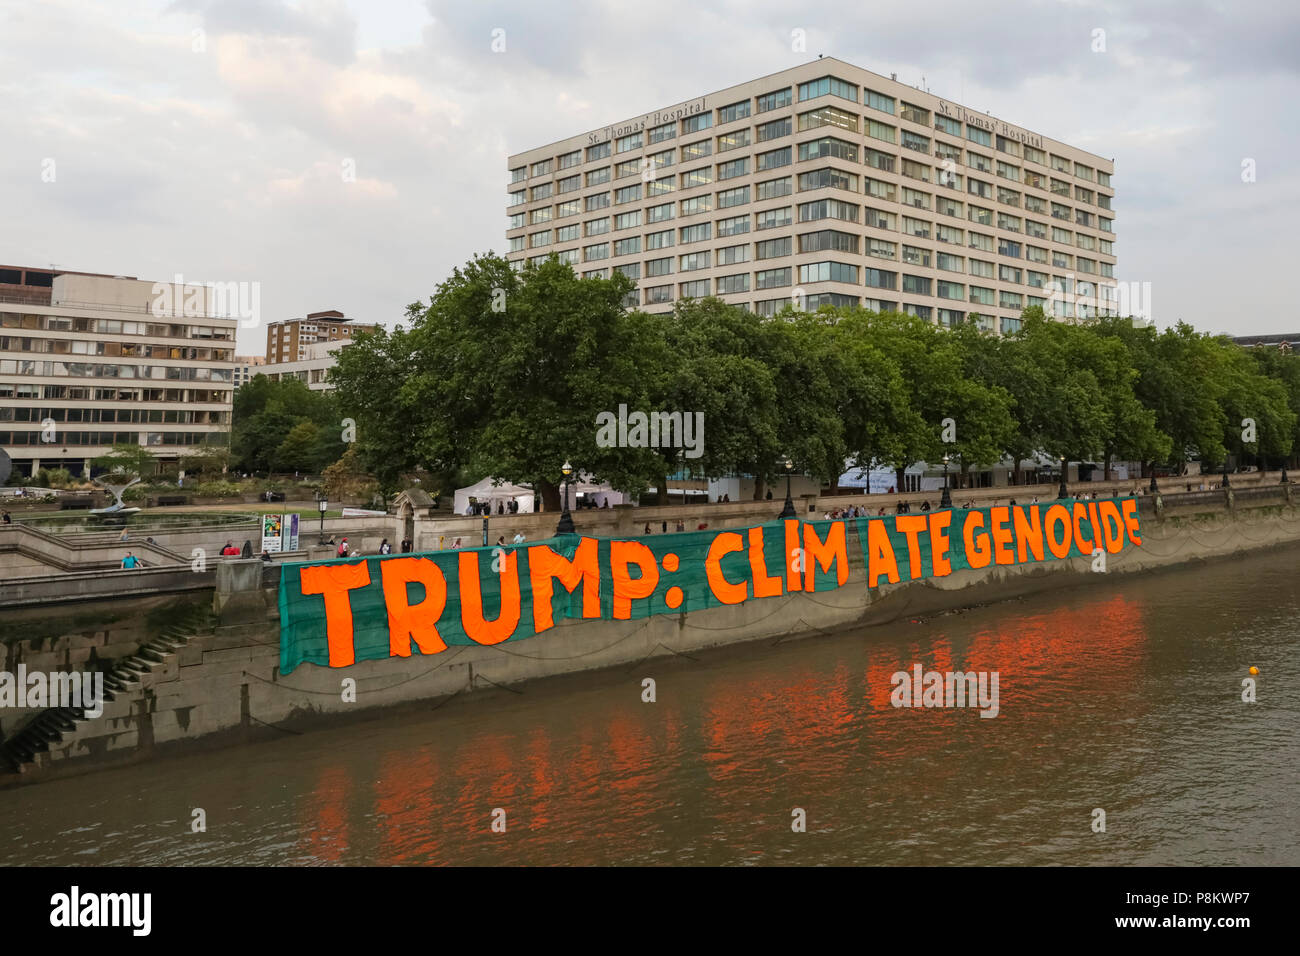 Westminster, London, 12th July 2018. Campaigners against climate change protest over Donald Trump's visit by dropping a giant banner reading 'Trump: Climate Genocide' at St Thomas’ Hospital Gardens, opposite the Houses of Parliament in Westminster. The huge banner, 100 metres x 9 metres large, is to raise awareness about the US president's climate policies. Credit: Imageplotter News and Sports/Alamy Live News Stock Photo